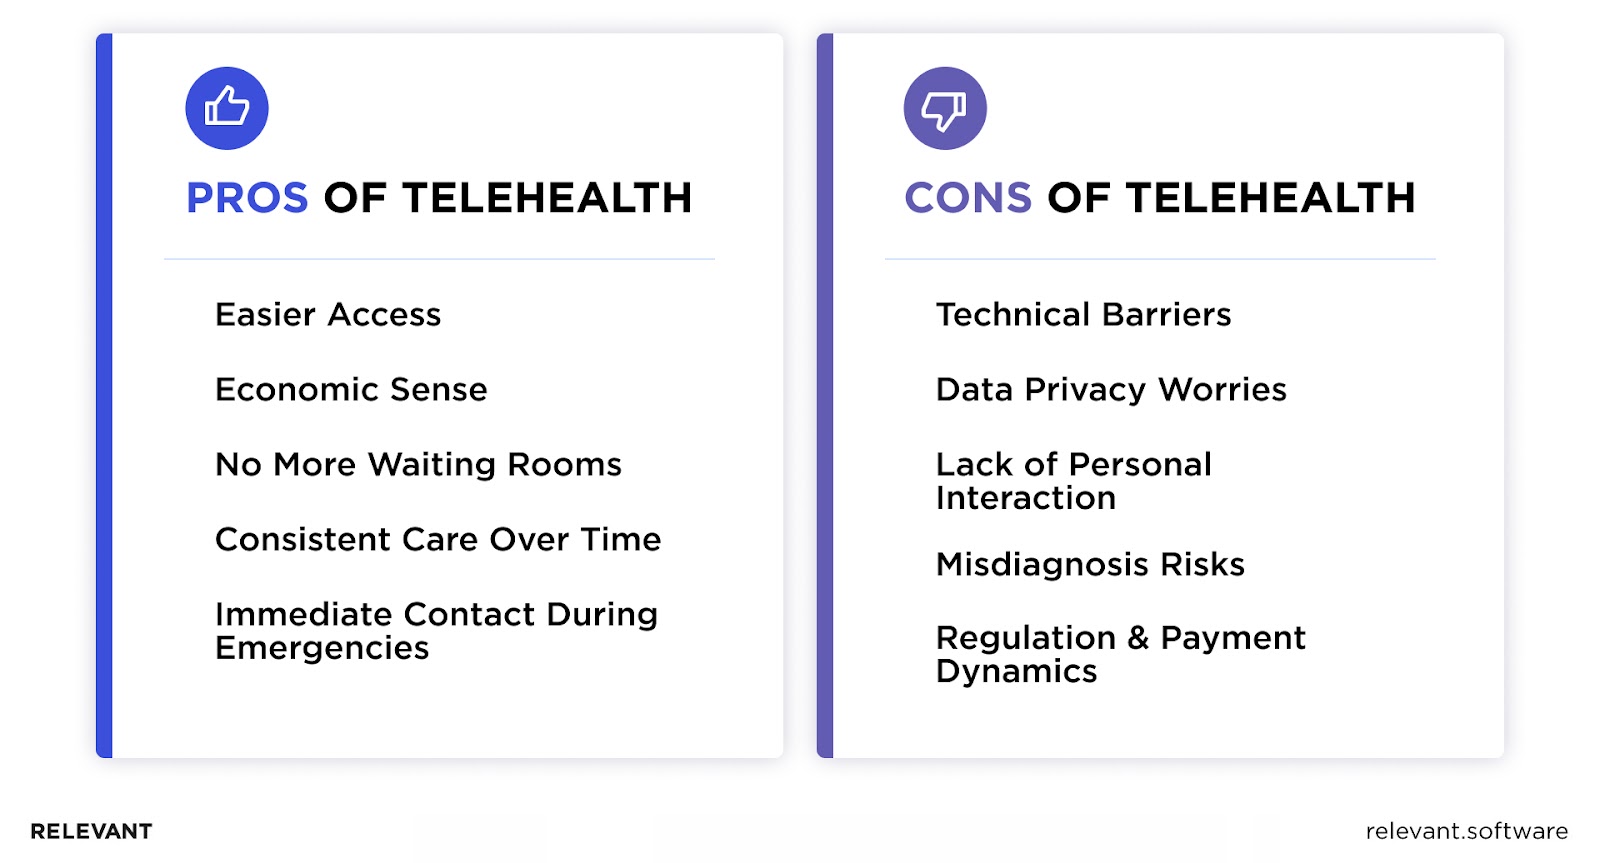 Pros and Cons of Telehealth